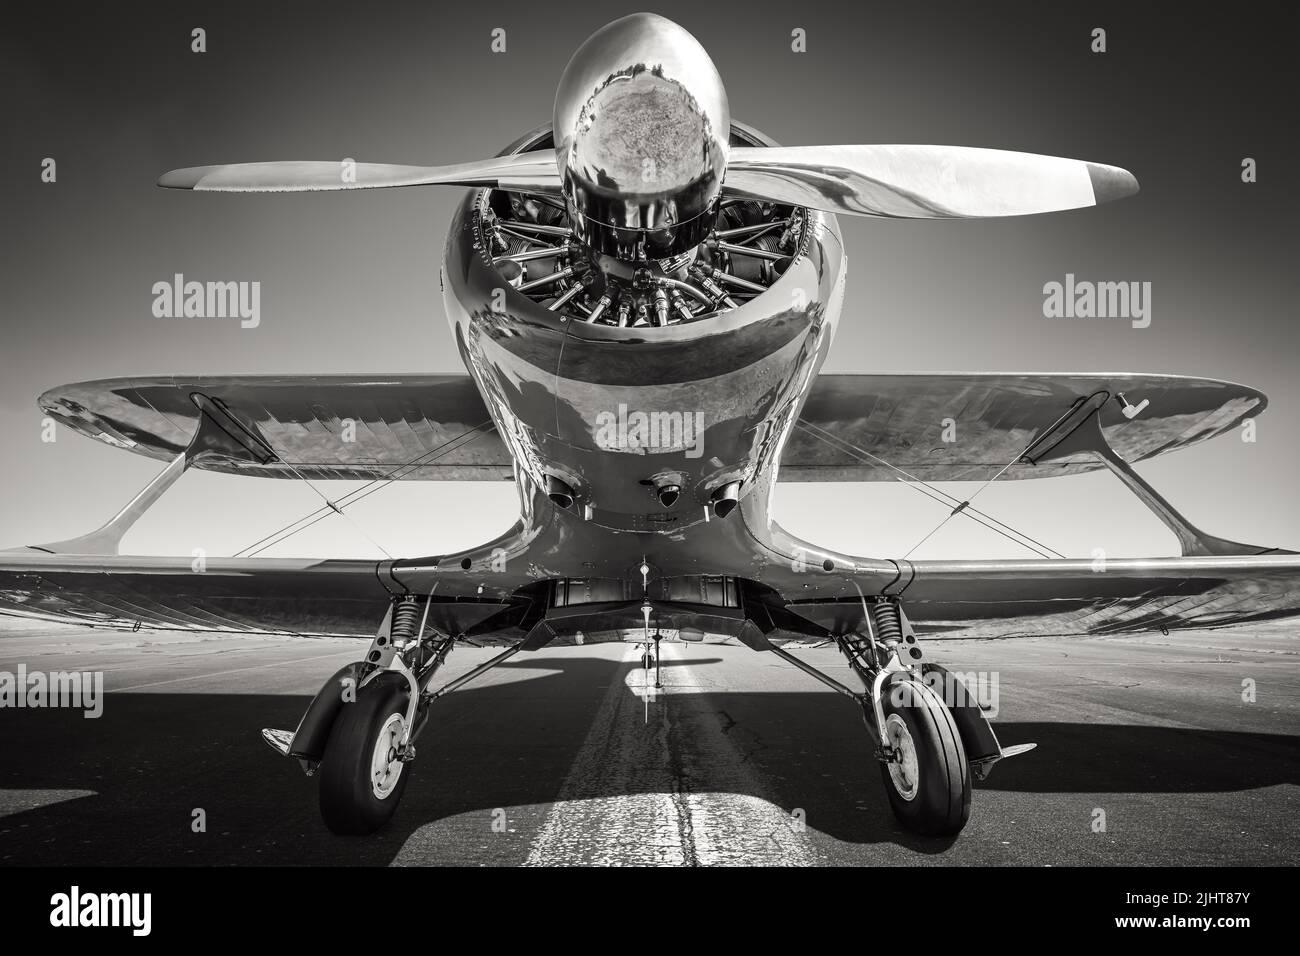 historical biplane on a runway ready for take off Stock Photo